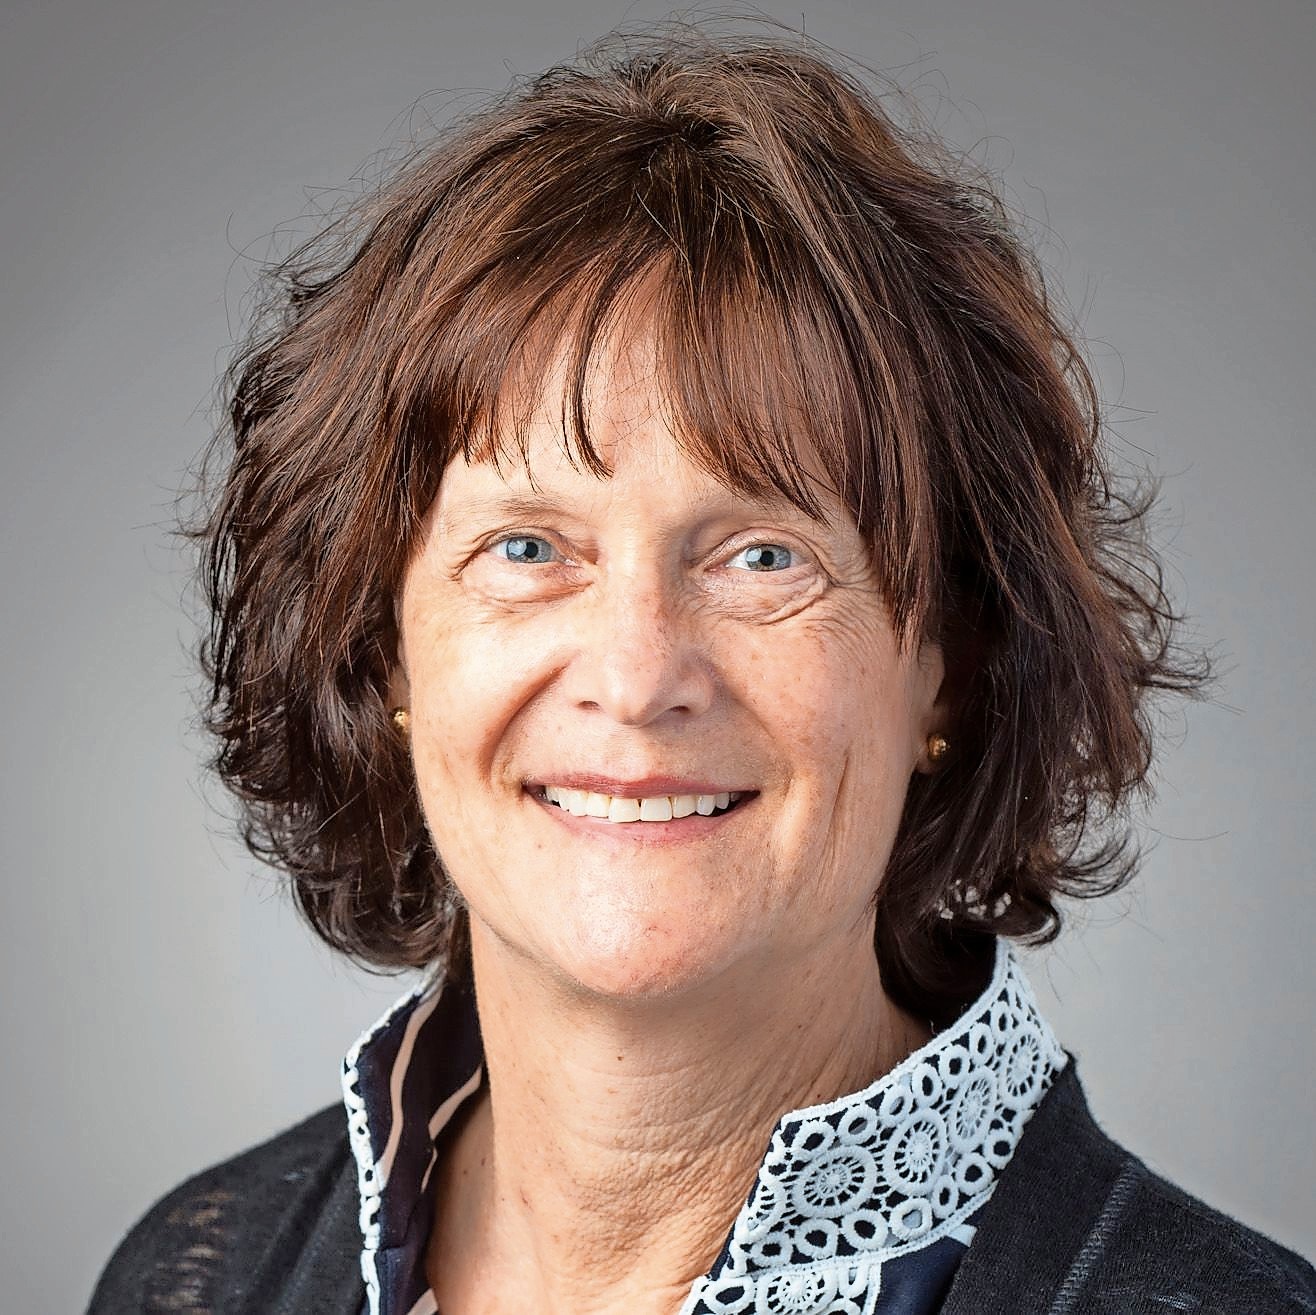 Janet Rovenpor has worked in various capacities at Manhattan College since 1991. Most recently, Rovenpor is working as the associate dean of the O?Malley School of Business, and is serving as interim dean until Don Gibson arrives this summer from Fairfield University in Connecticut.